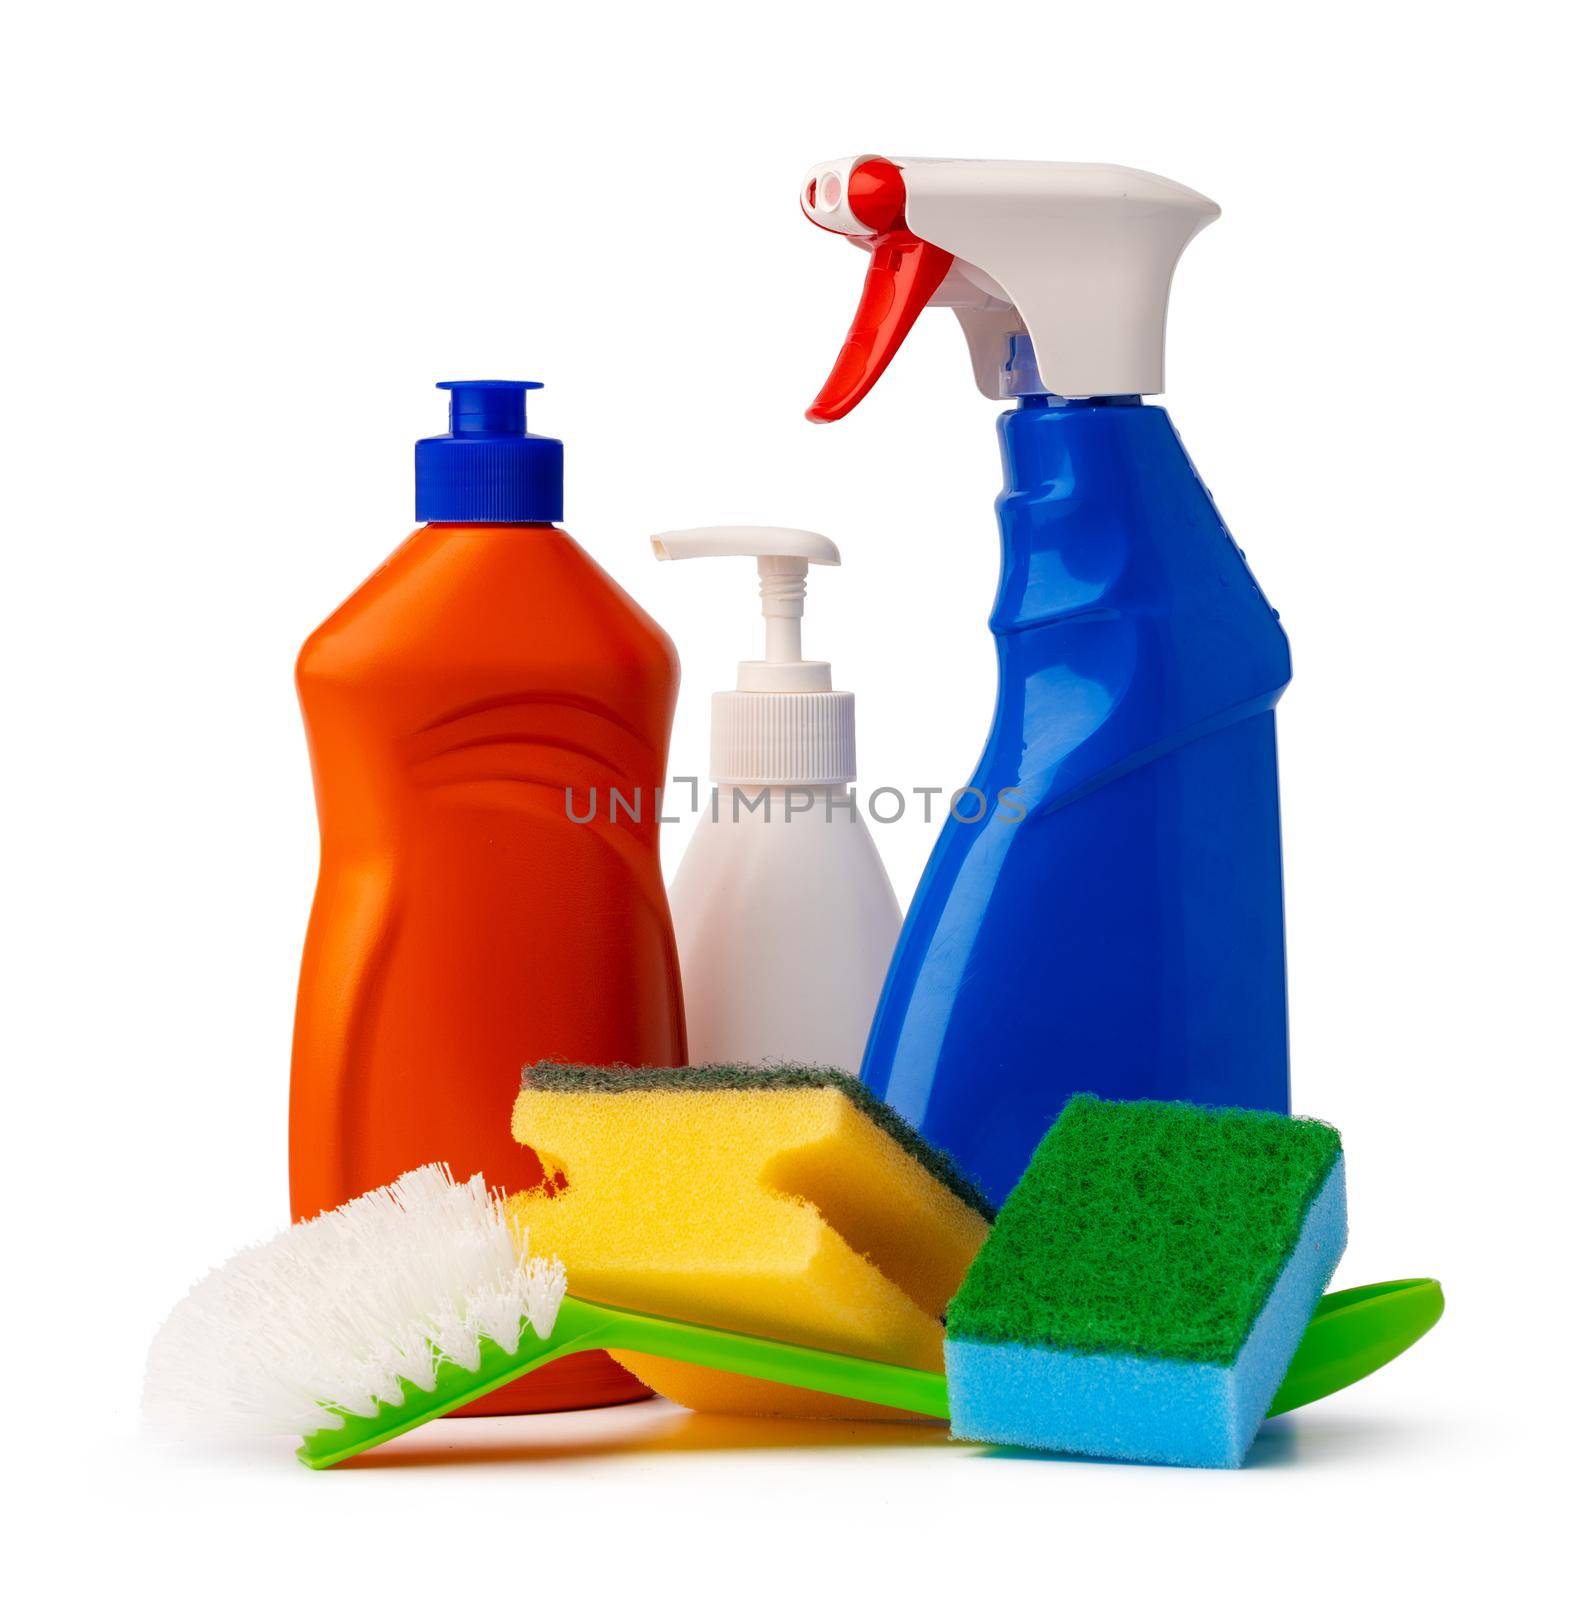 Sanitary household cleaning items isolated on white background, close up